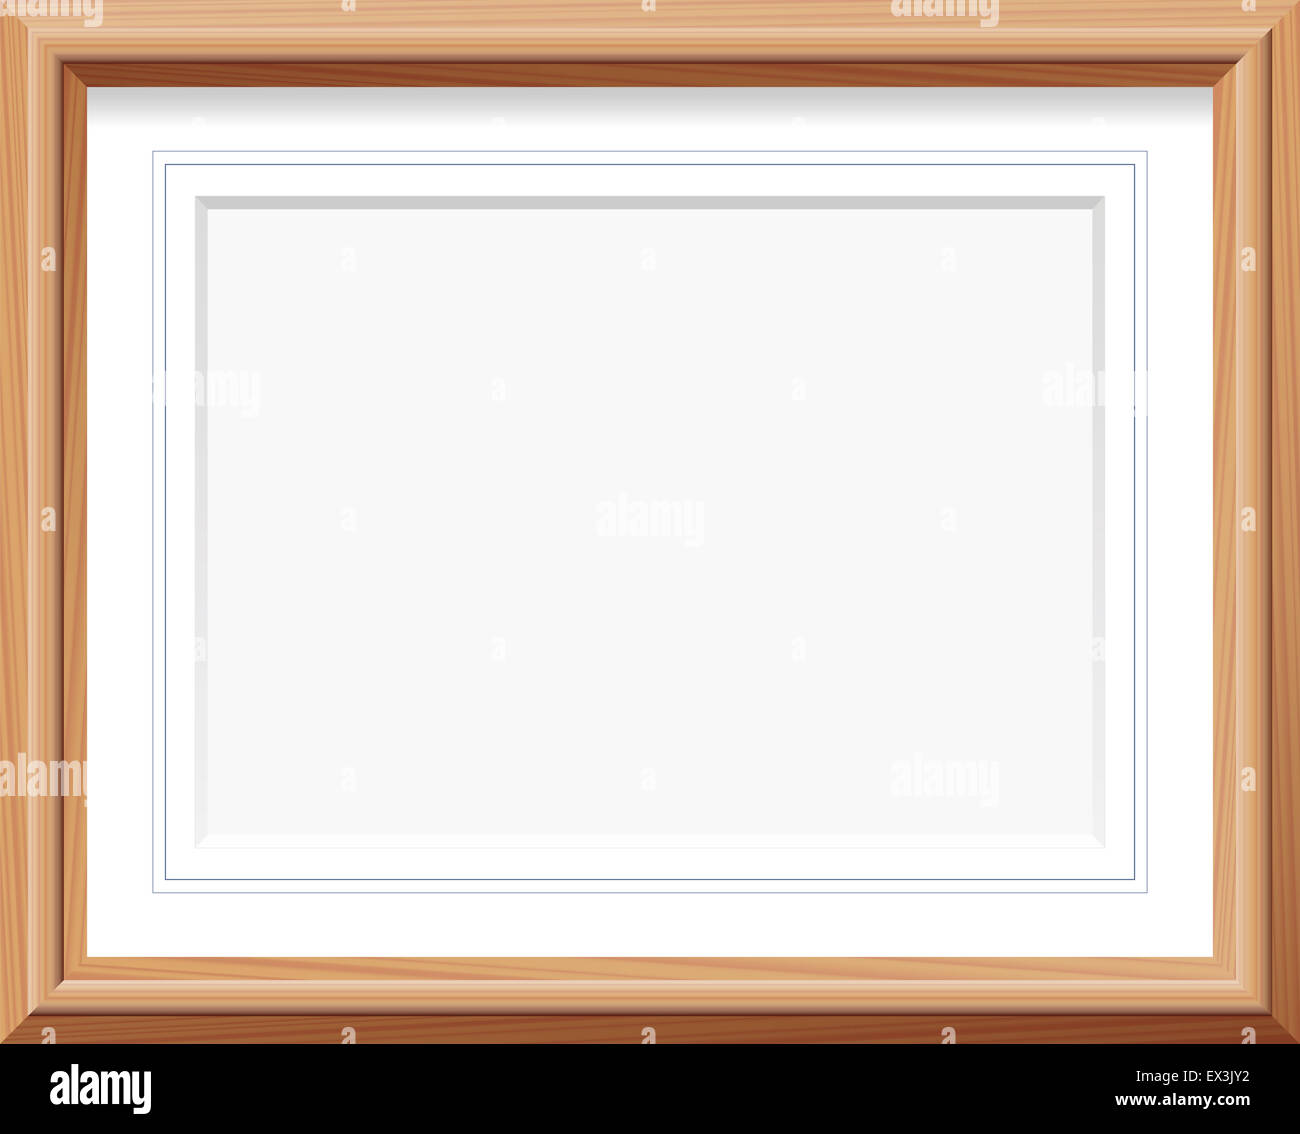 Horizontal wooden picture frame with mat and french lines. Illustration. Stock Photo